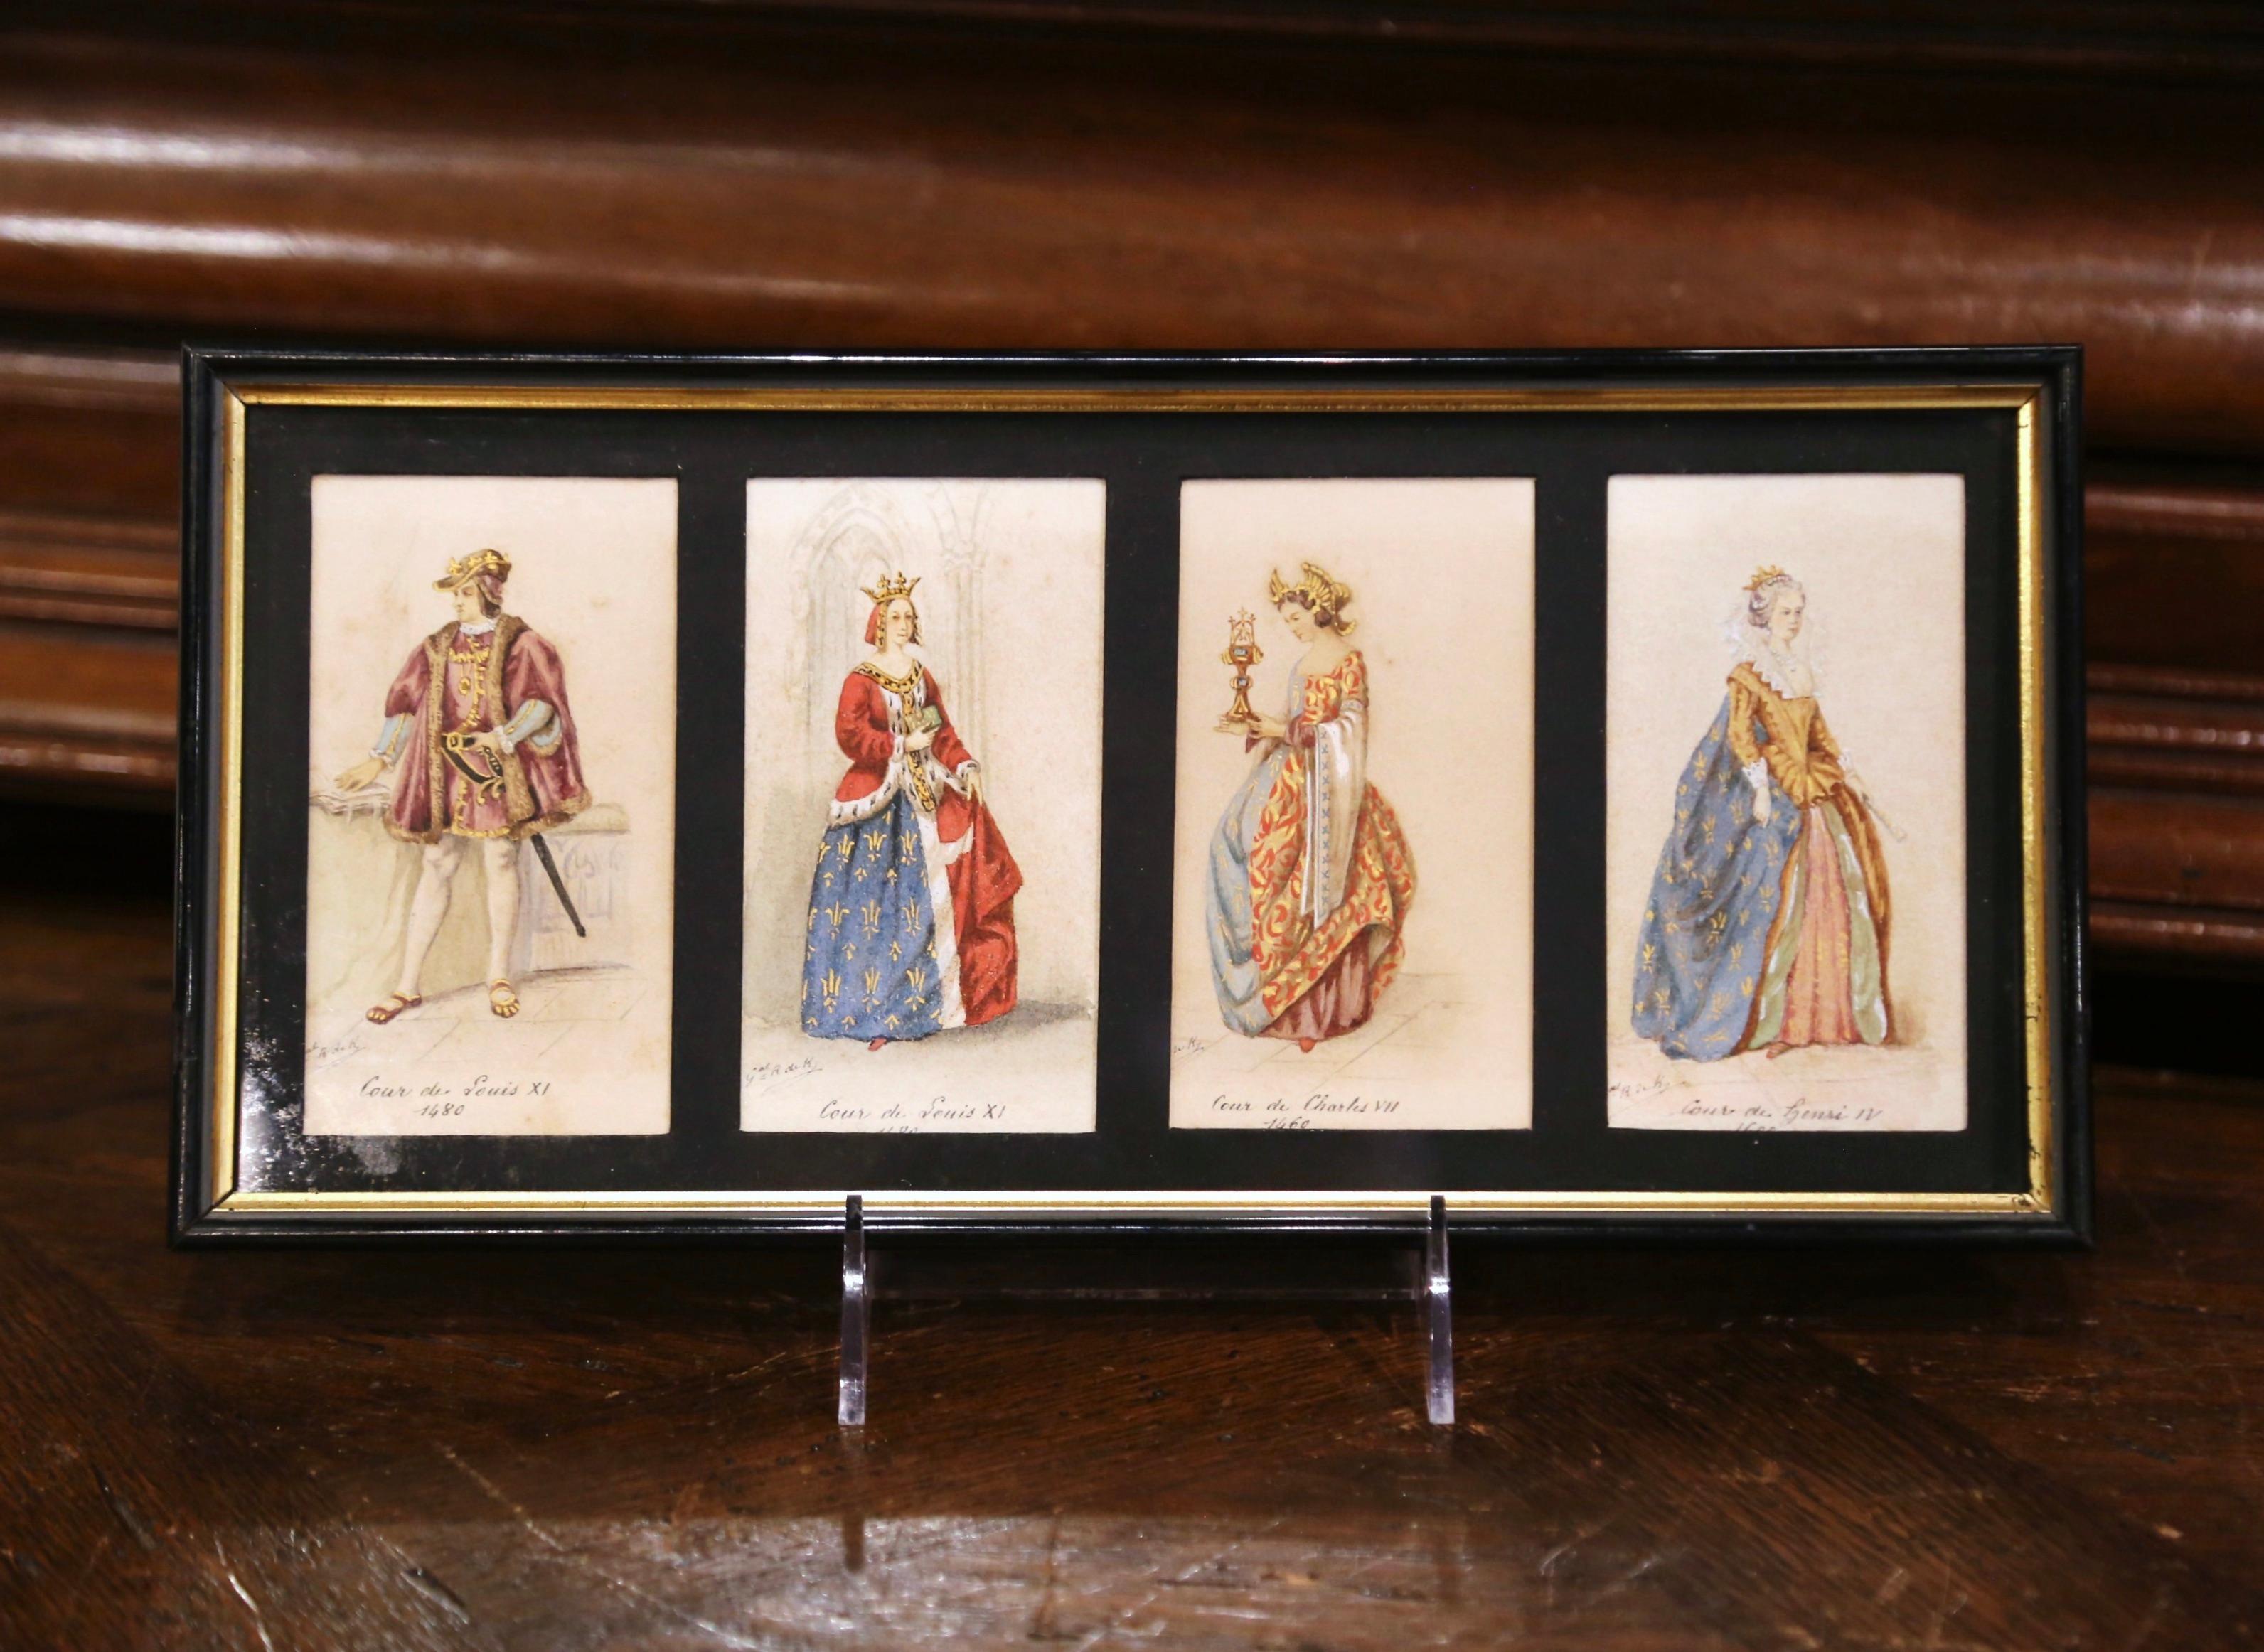 Decorate a bathroom or a walking closet with this collection of antique prints. Crafted in France during the Napoleon III period from 1848-1870, each piece is set in a simple black and gold frame protected with glass, and depicts 3 kings of France